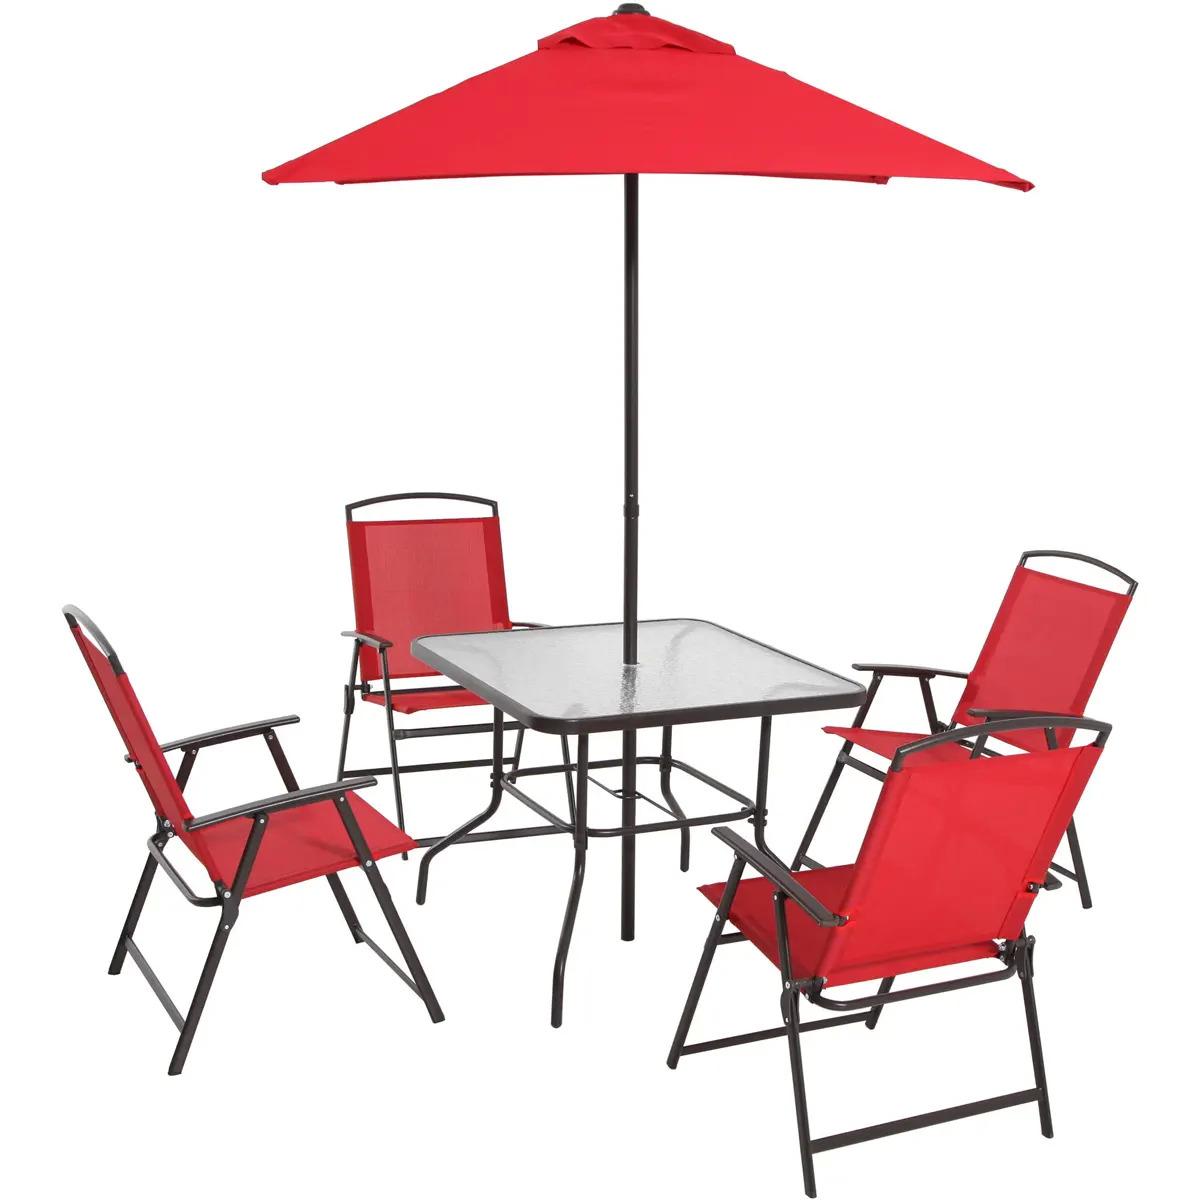 Mainstays Albany Lane Outdoor Patio Dining Set for $80 Shipped